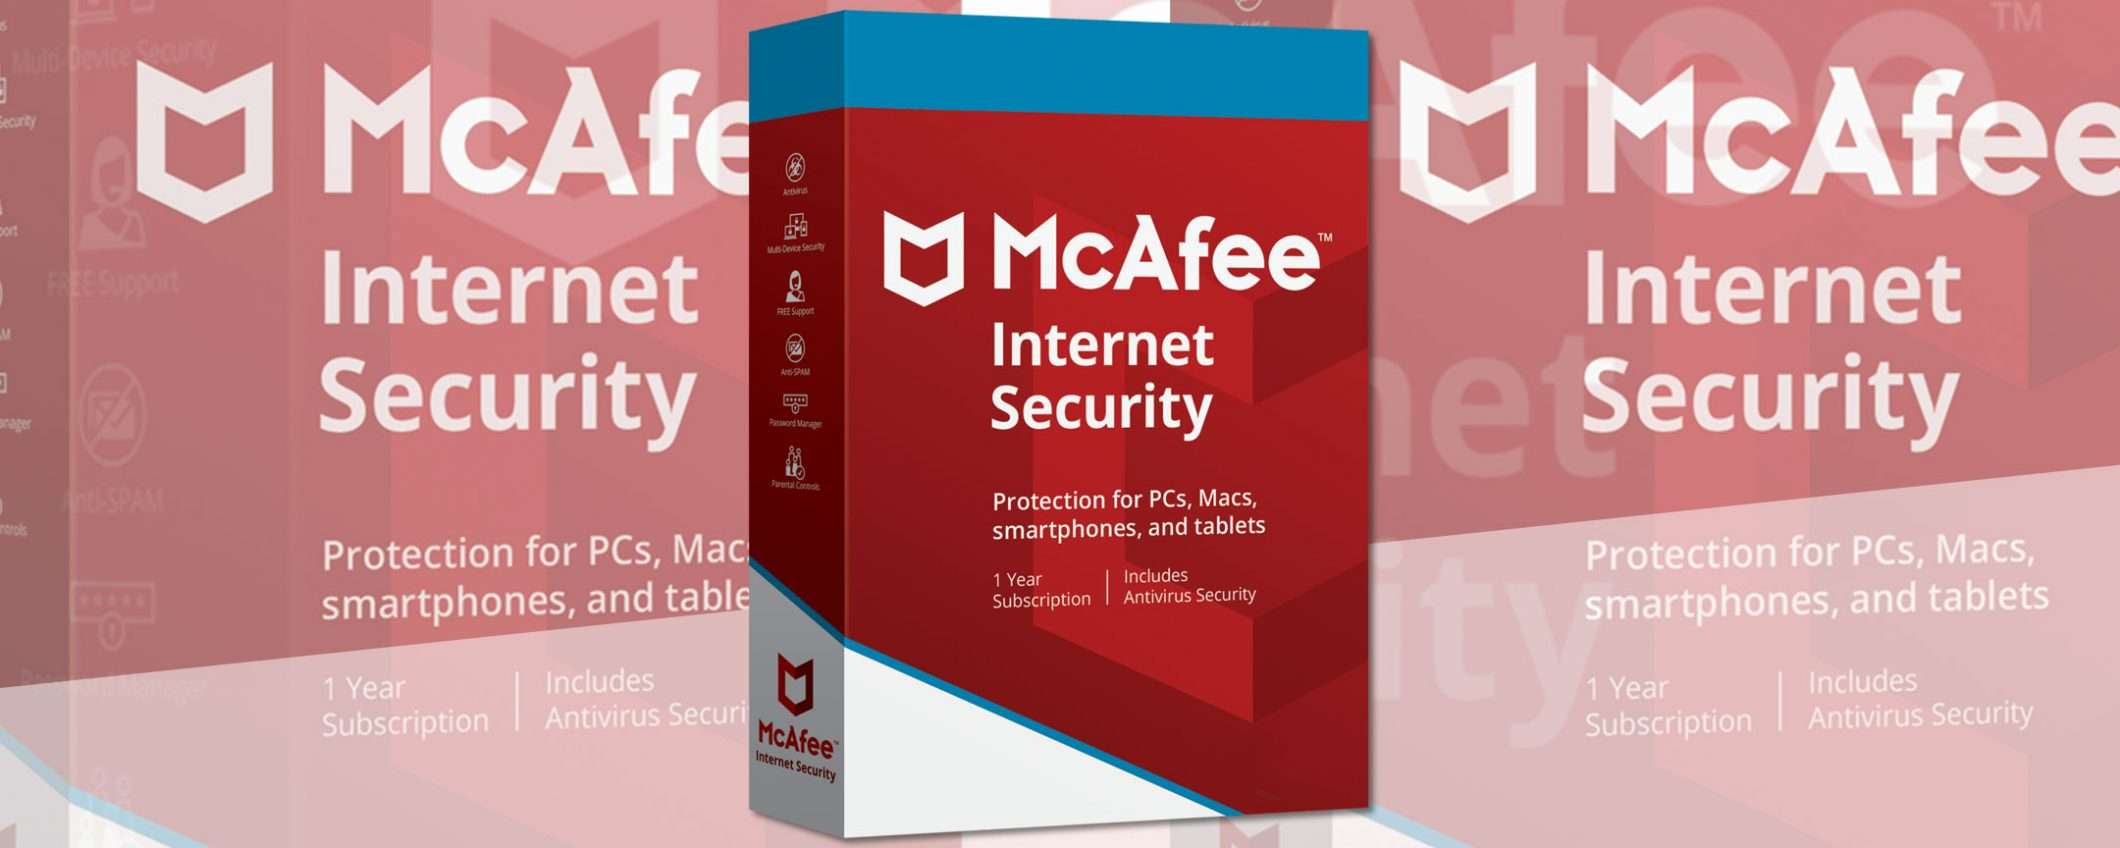 McAfee Internet Security 2019 in offerta a € 10,99